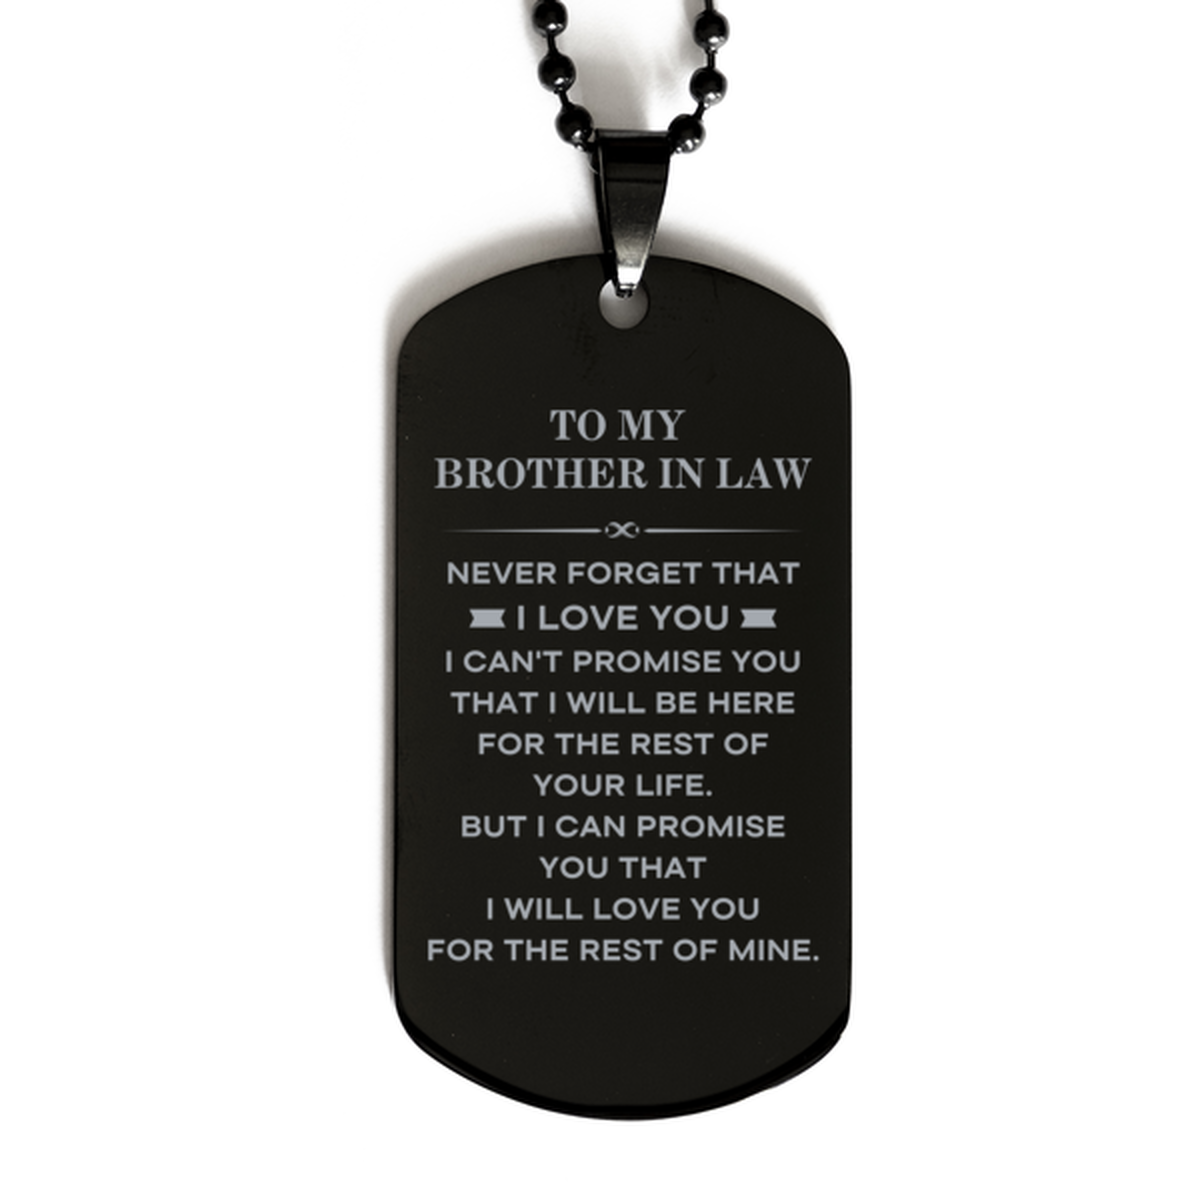 To My Brother In Law Gifts, I will love you for the rest of mine, Love Brother In Law Dog Tag Necklace, Birthday Christmas Unique Black Dog Tag For Brother In Law